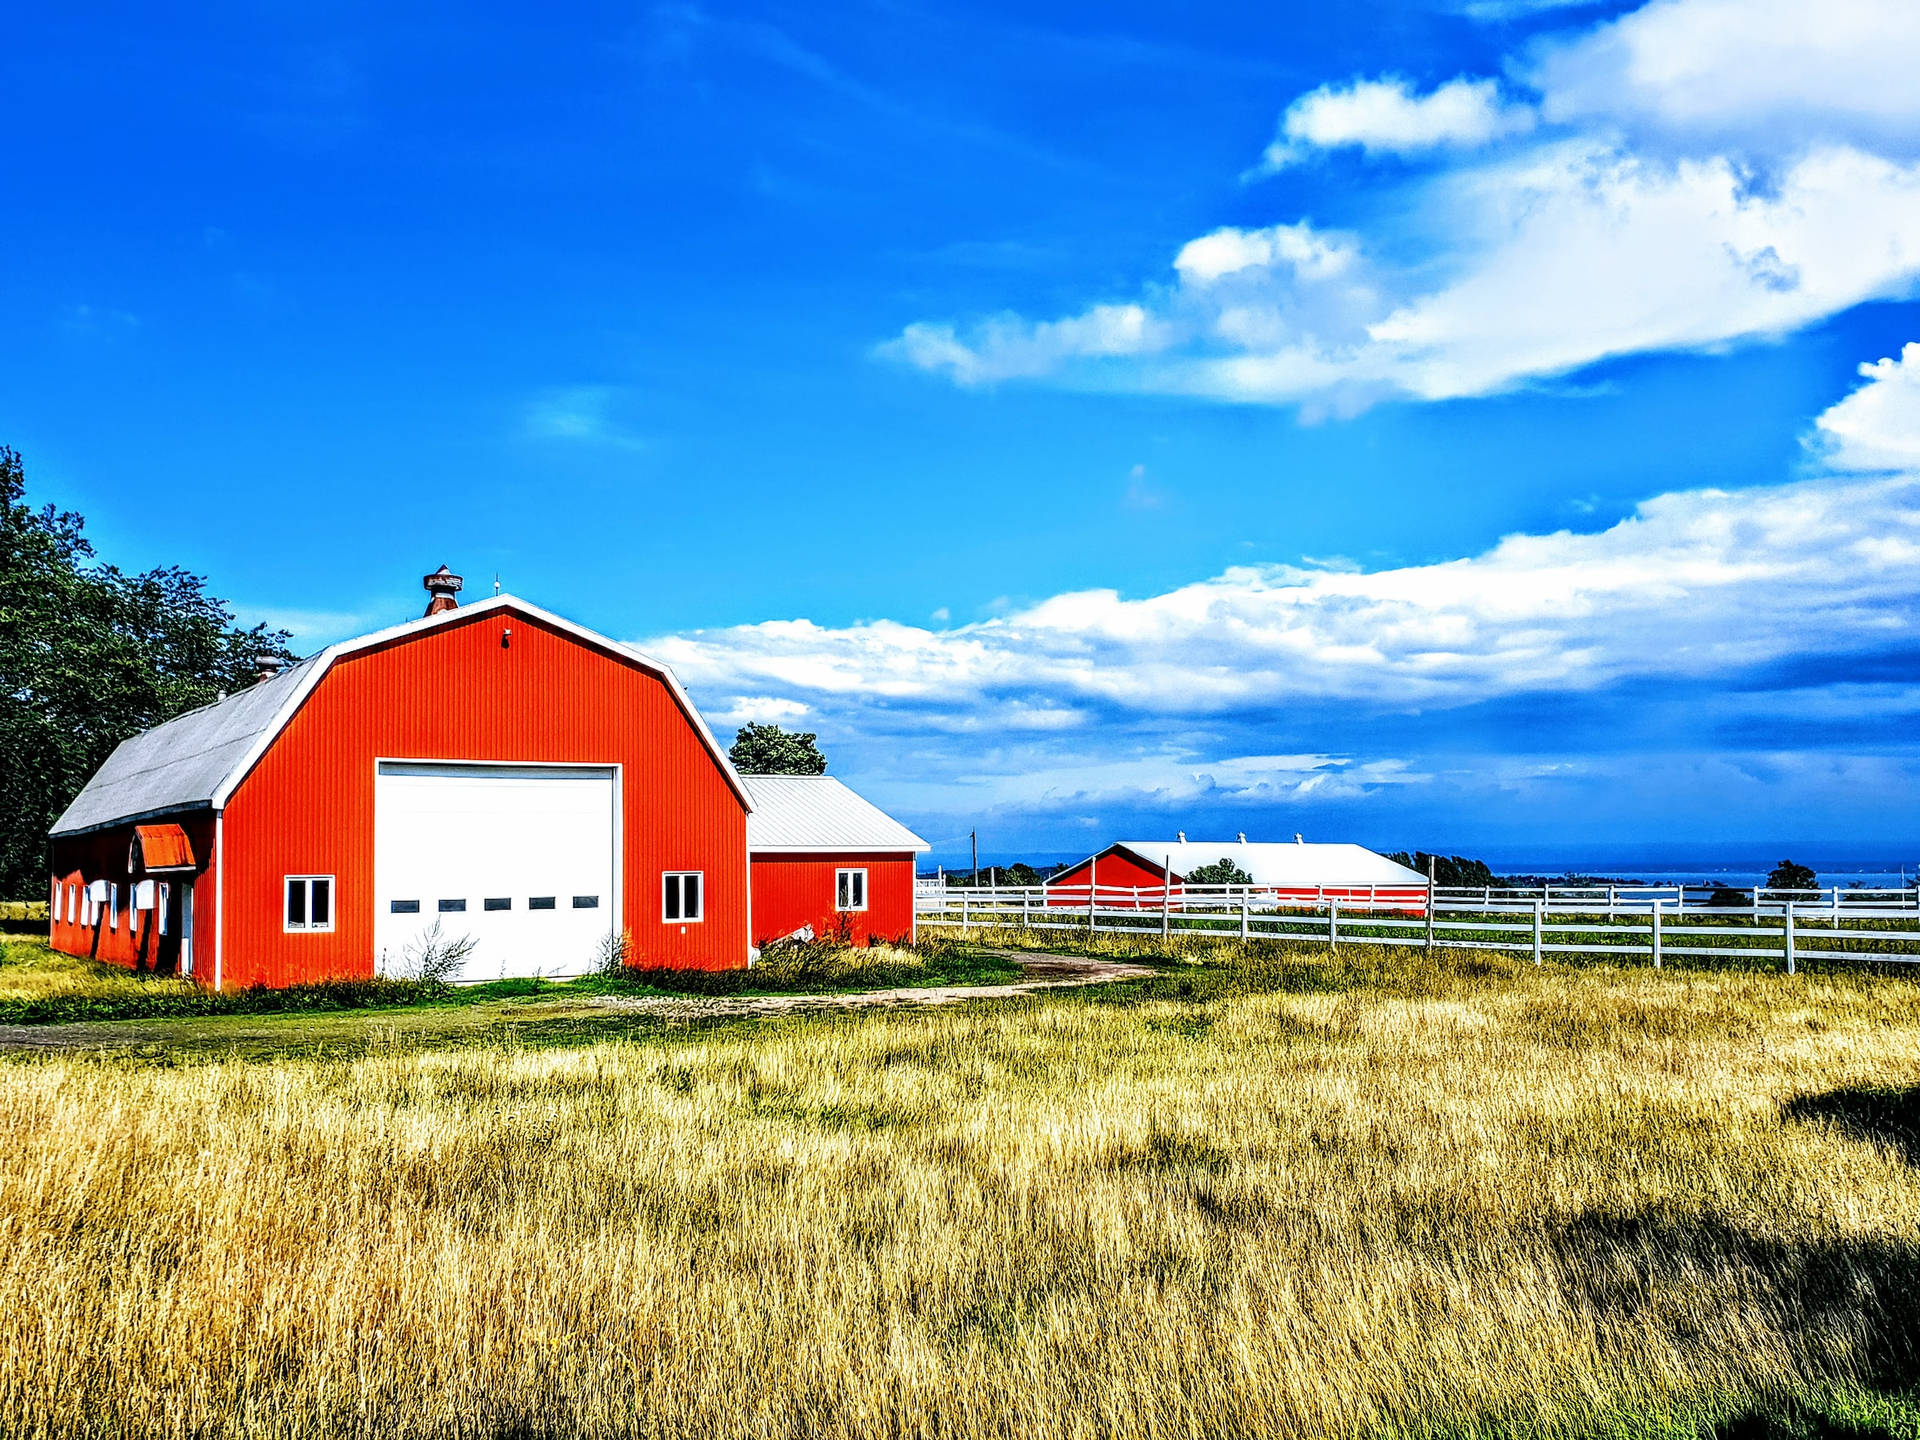 Red Orange Painted Barn Shed In Farm Wallpaper